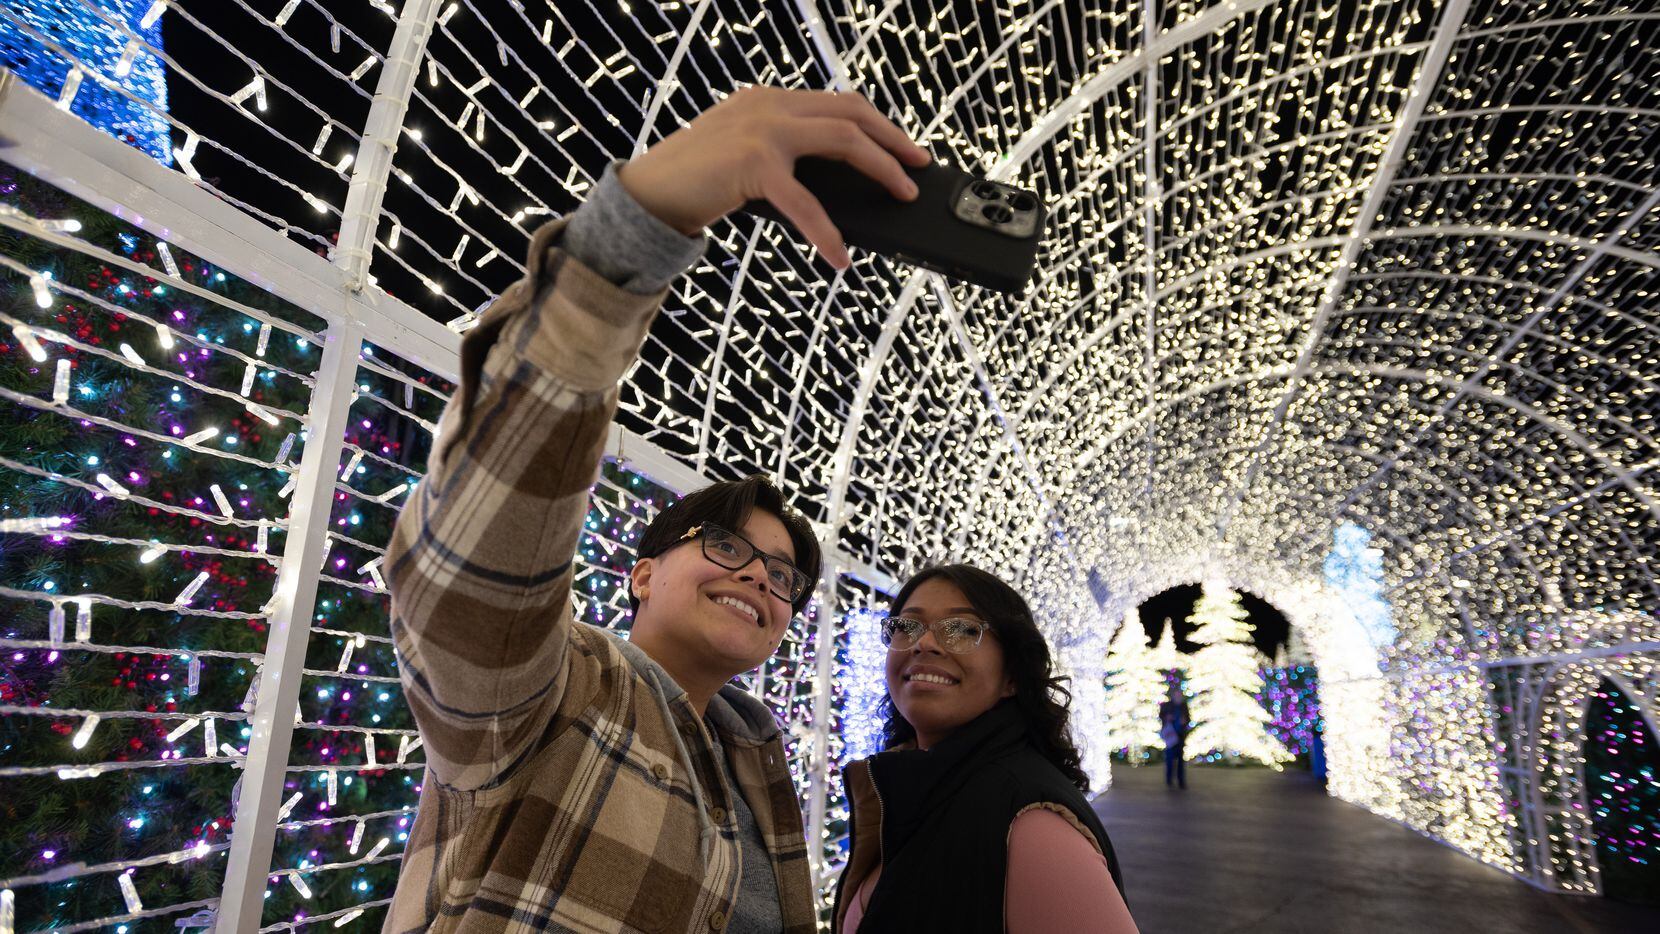 Joanne Benitez, 23, left, and Maria Reboyedo, 22, interact inside a light maze during the...